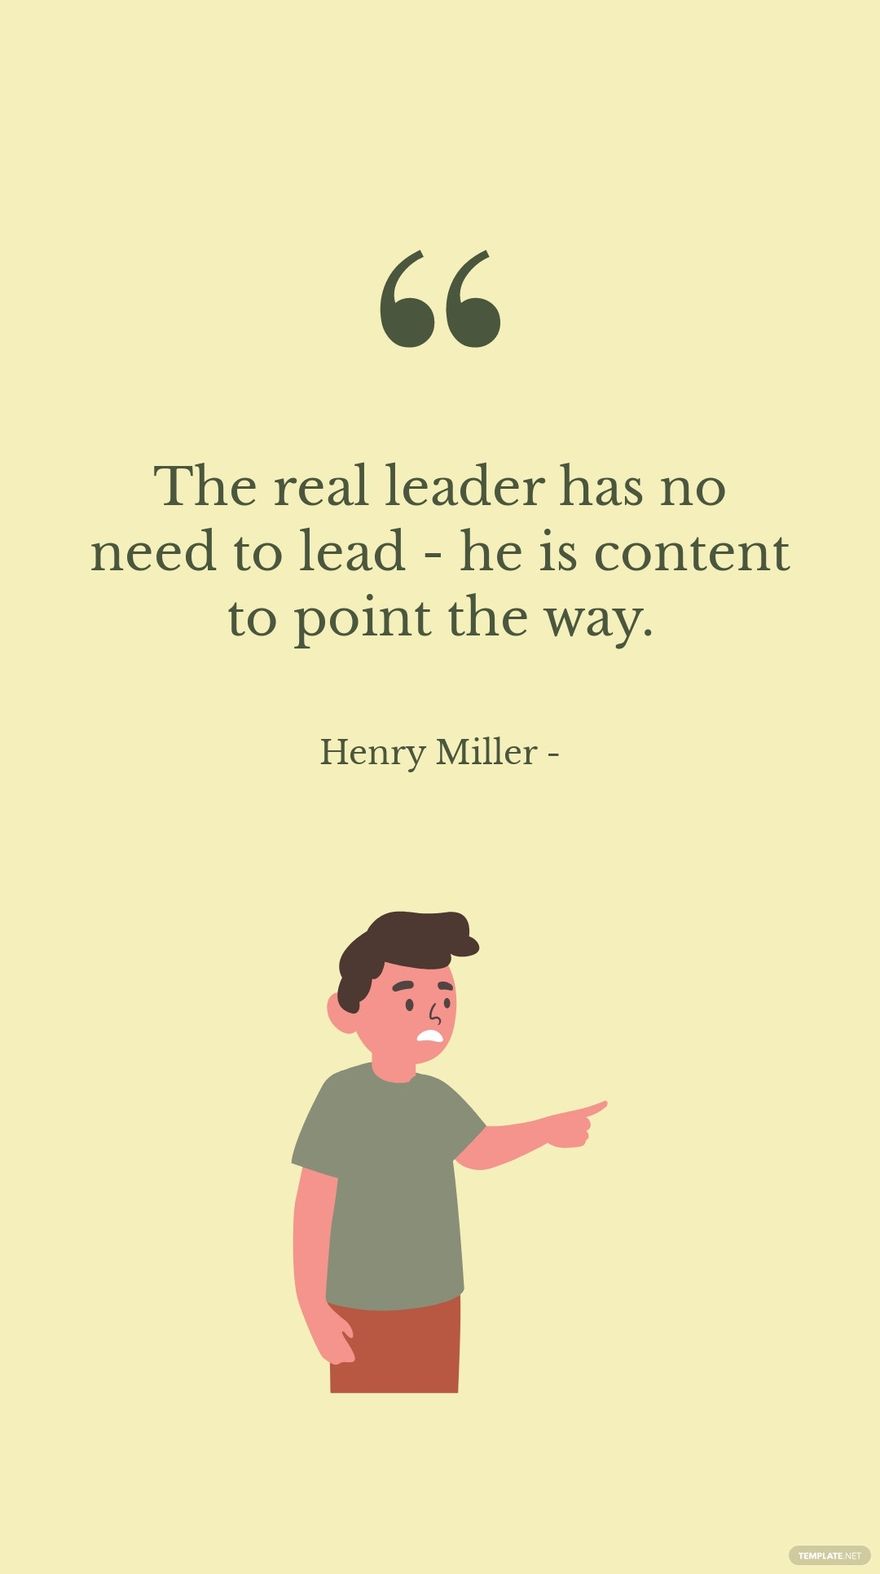 Henry Miller - The real leader has no need to lead - he is content to point the way. in JPG